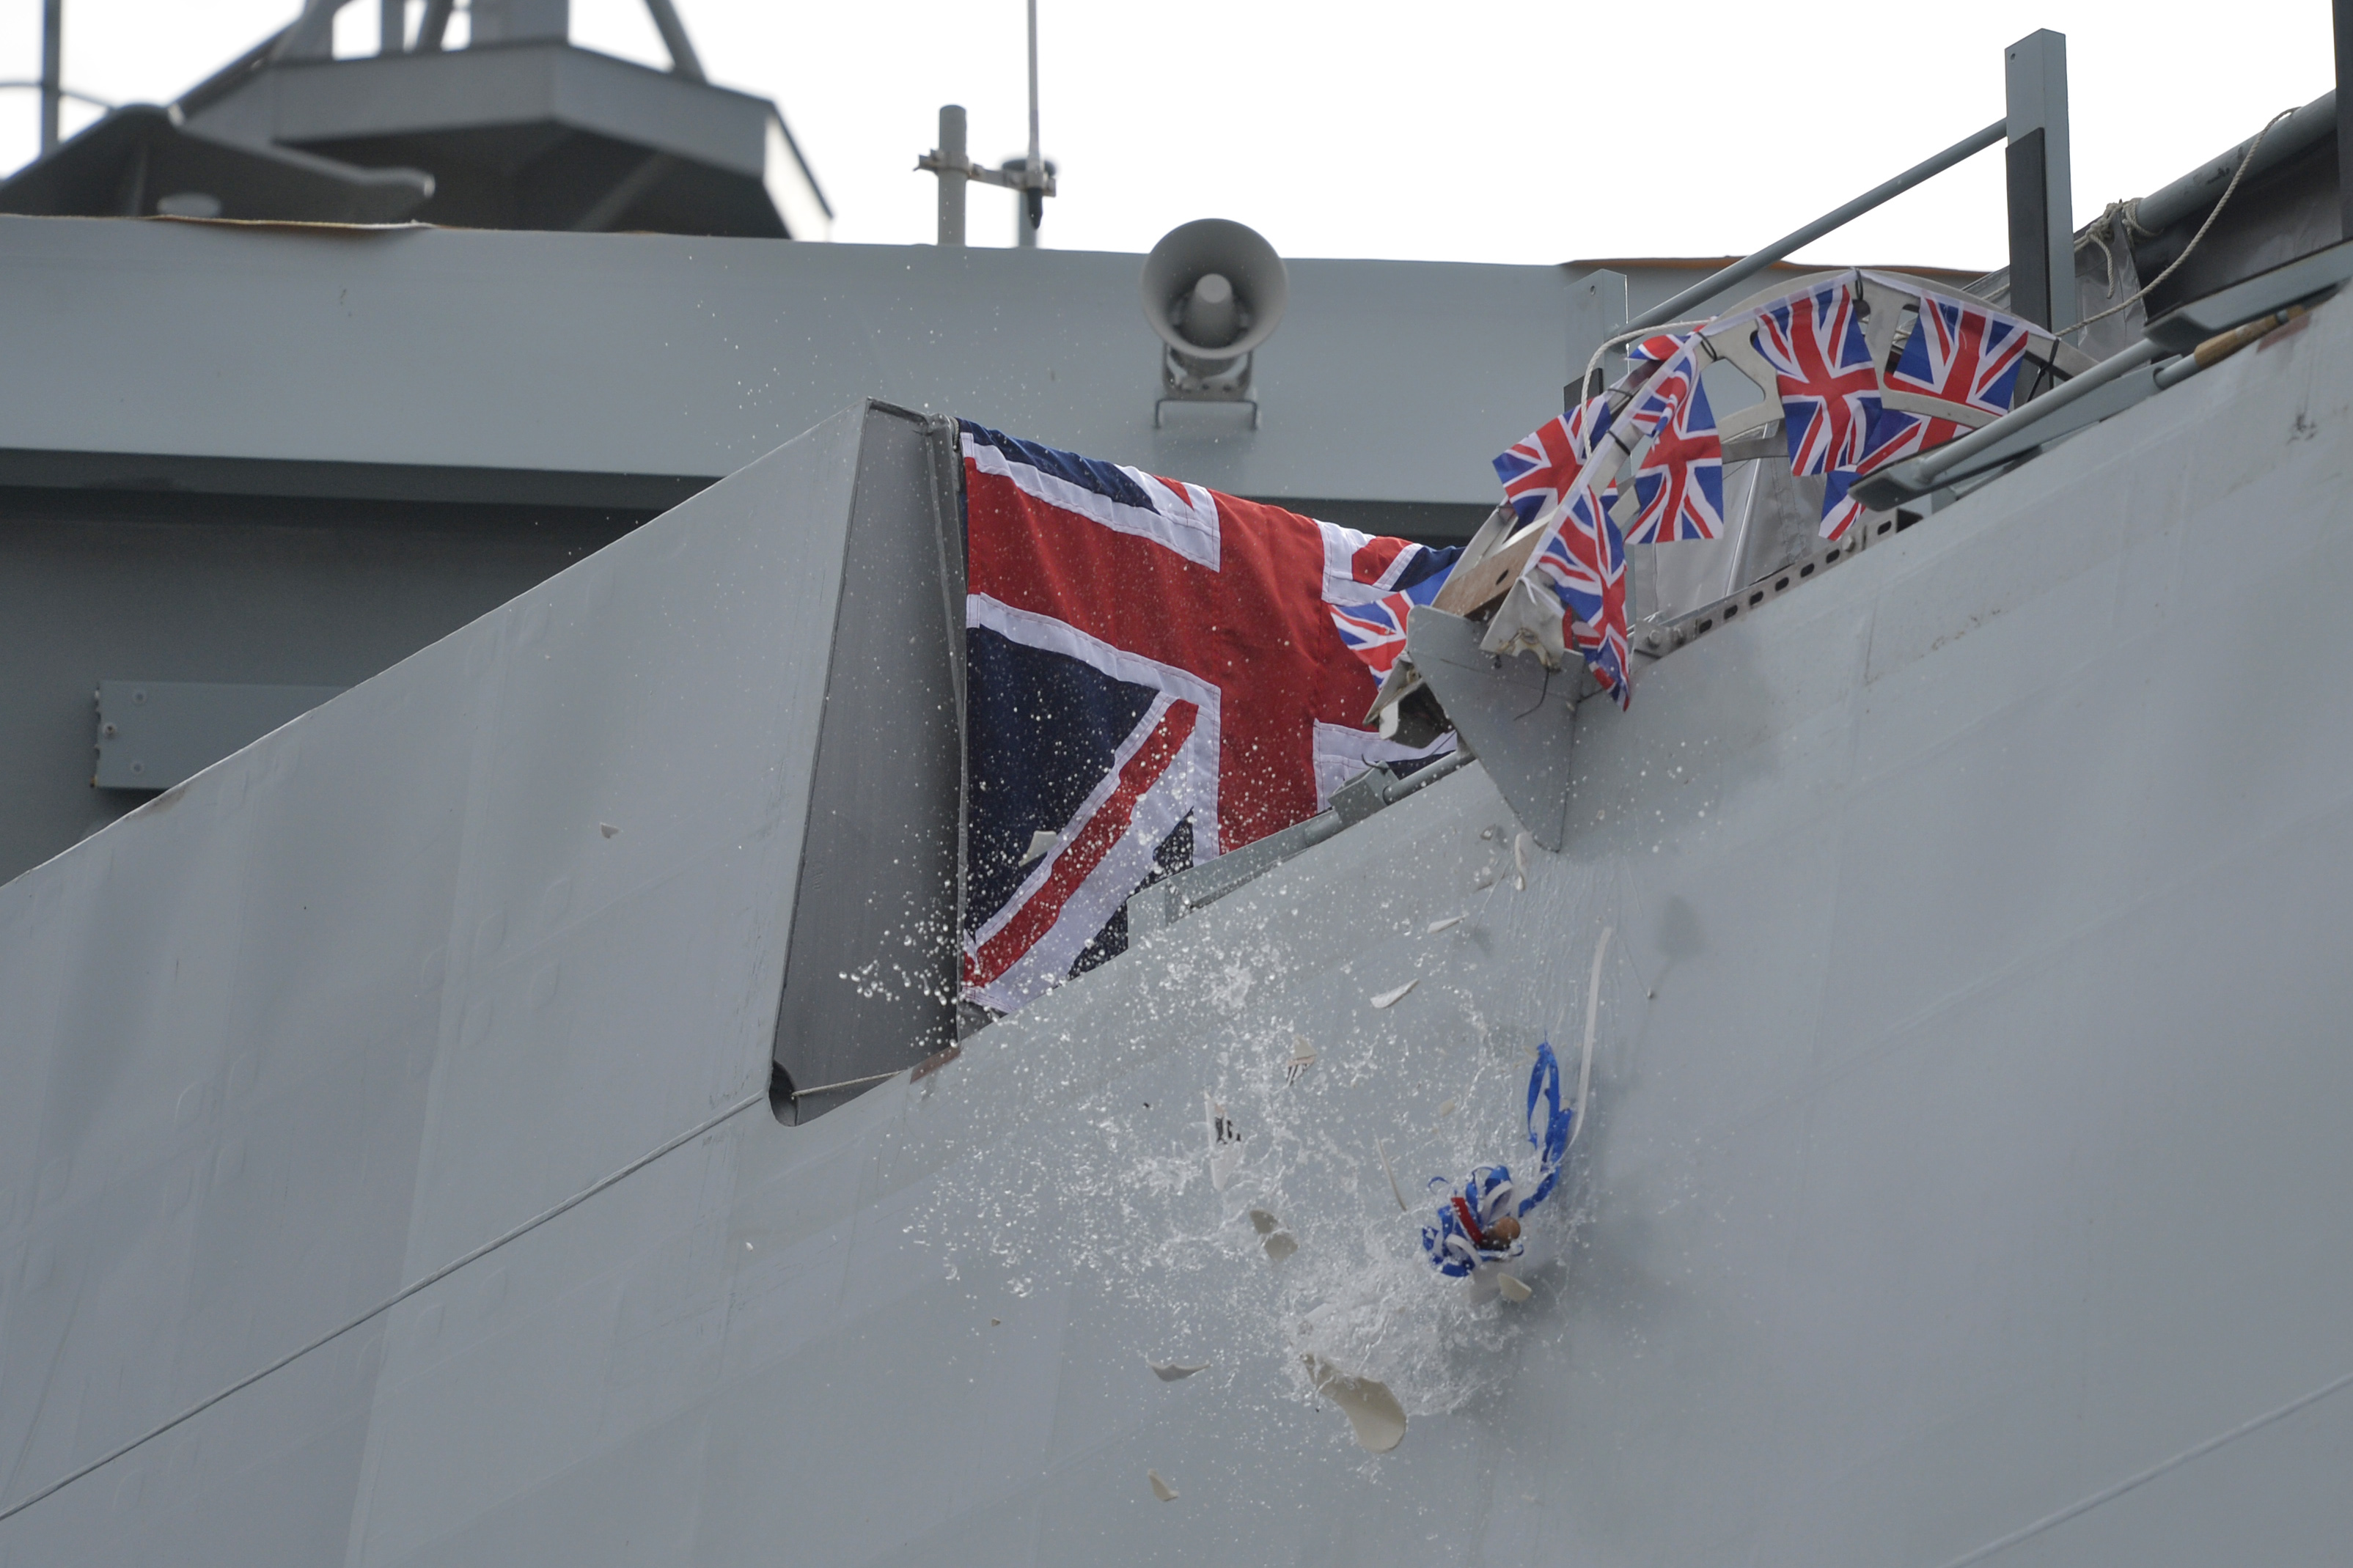 A bottle from Nelson's Gin Distillery & Gin School was smashed onto the ship during the ceremony (John Linton/PA)